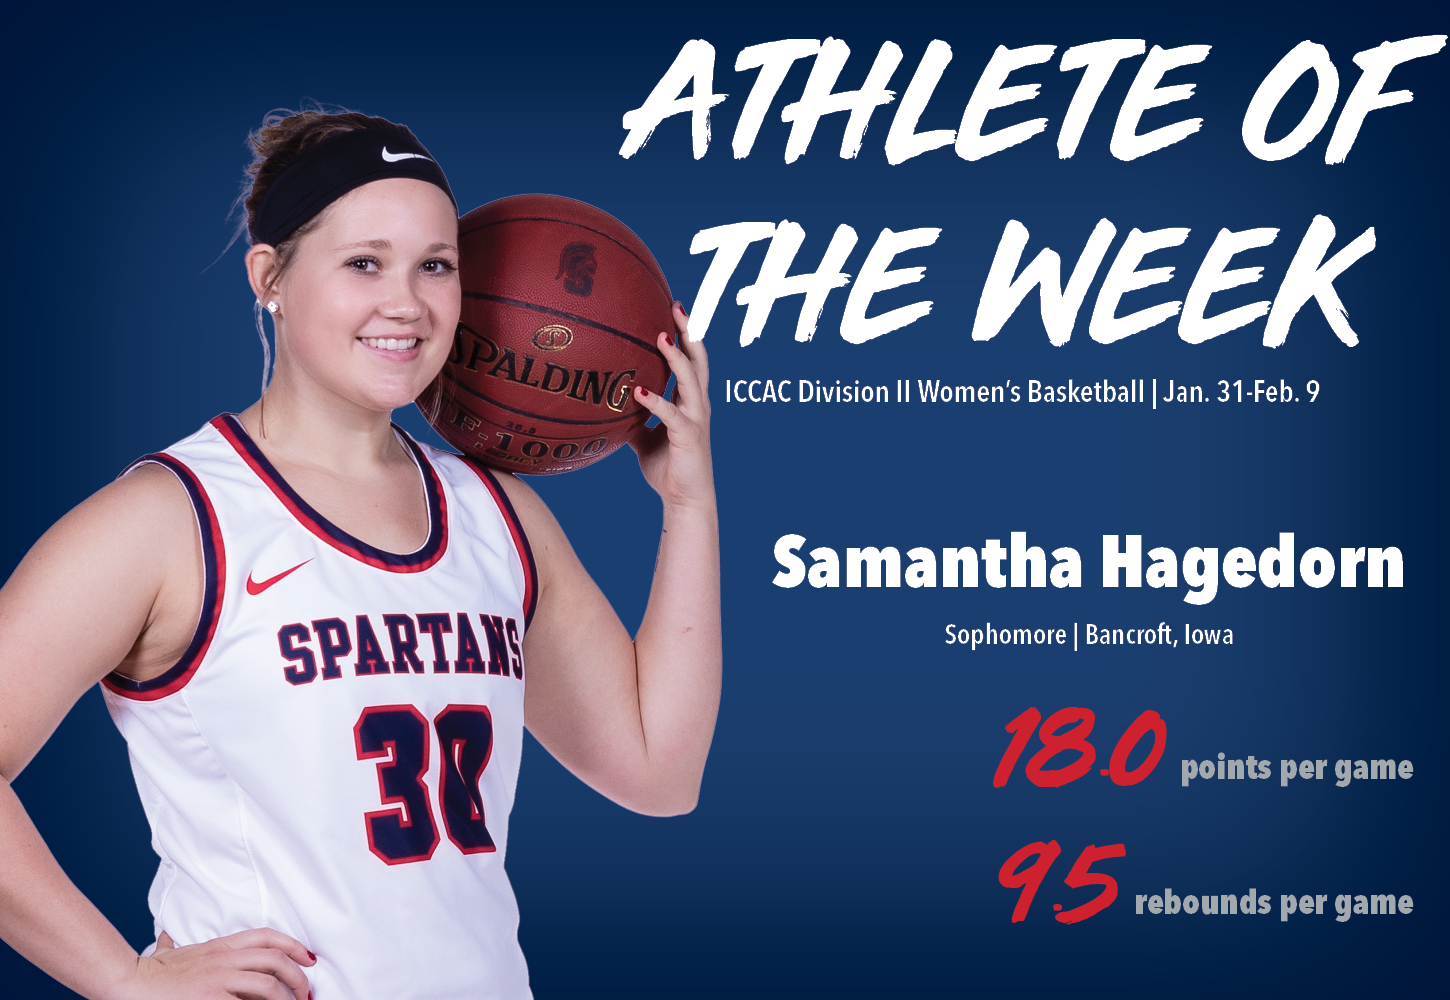 Sam Hagedorn was named ICCAC Athlete of the Week for the week of Jan. 31 through Feb. 9.